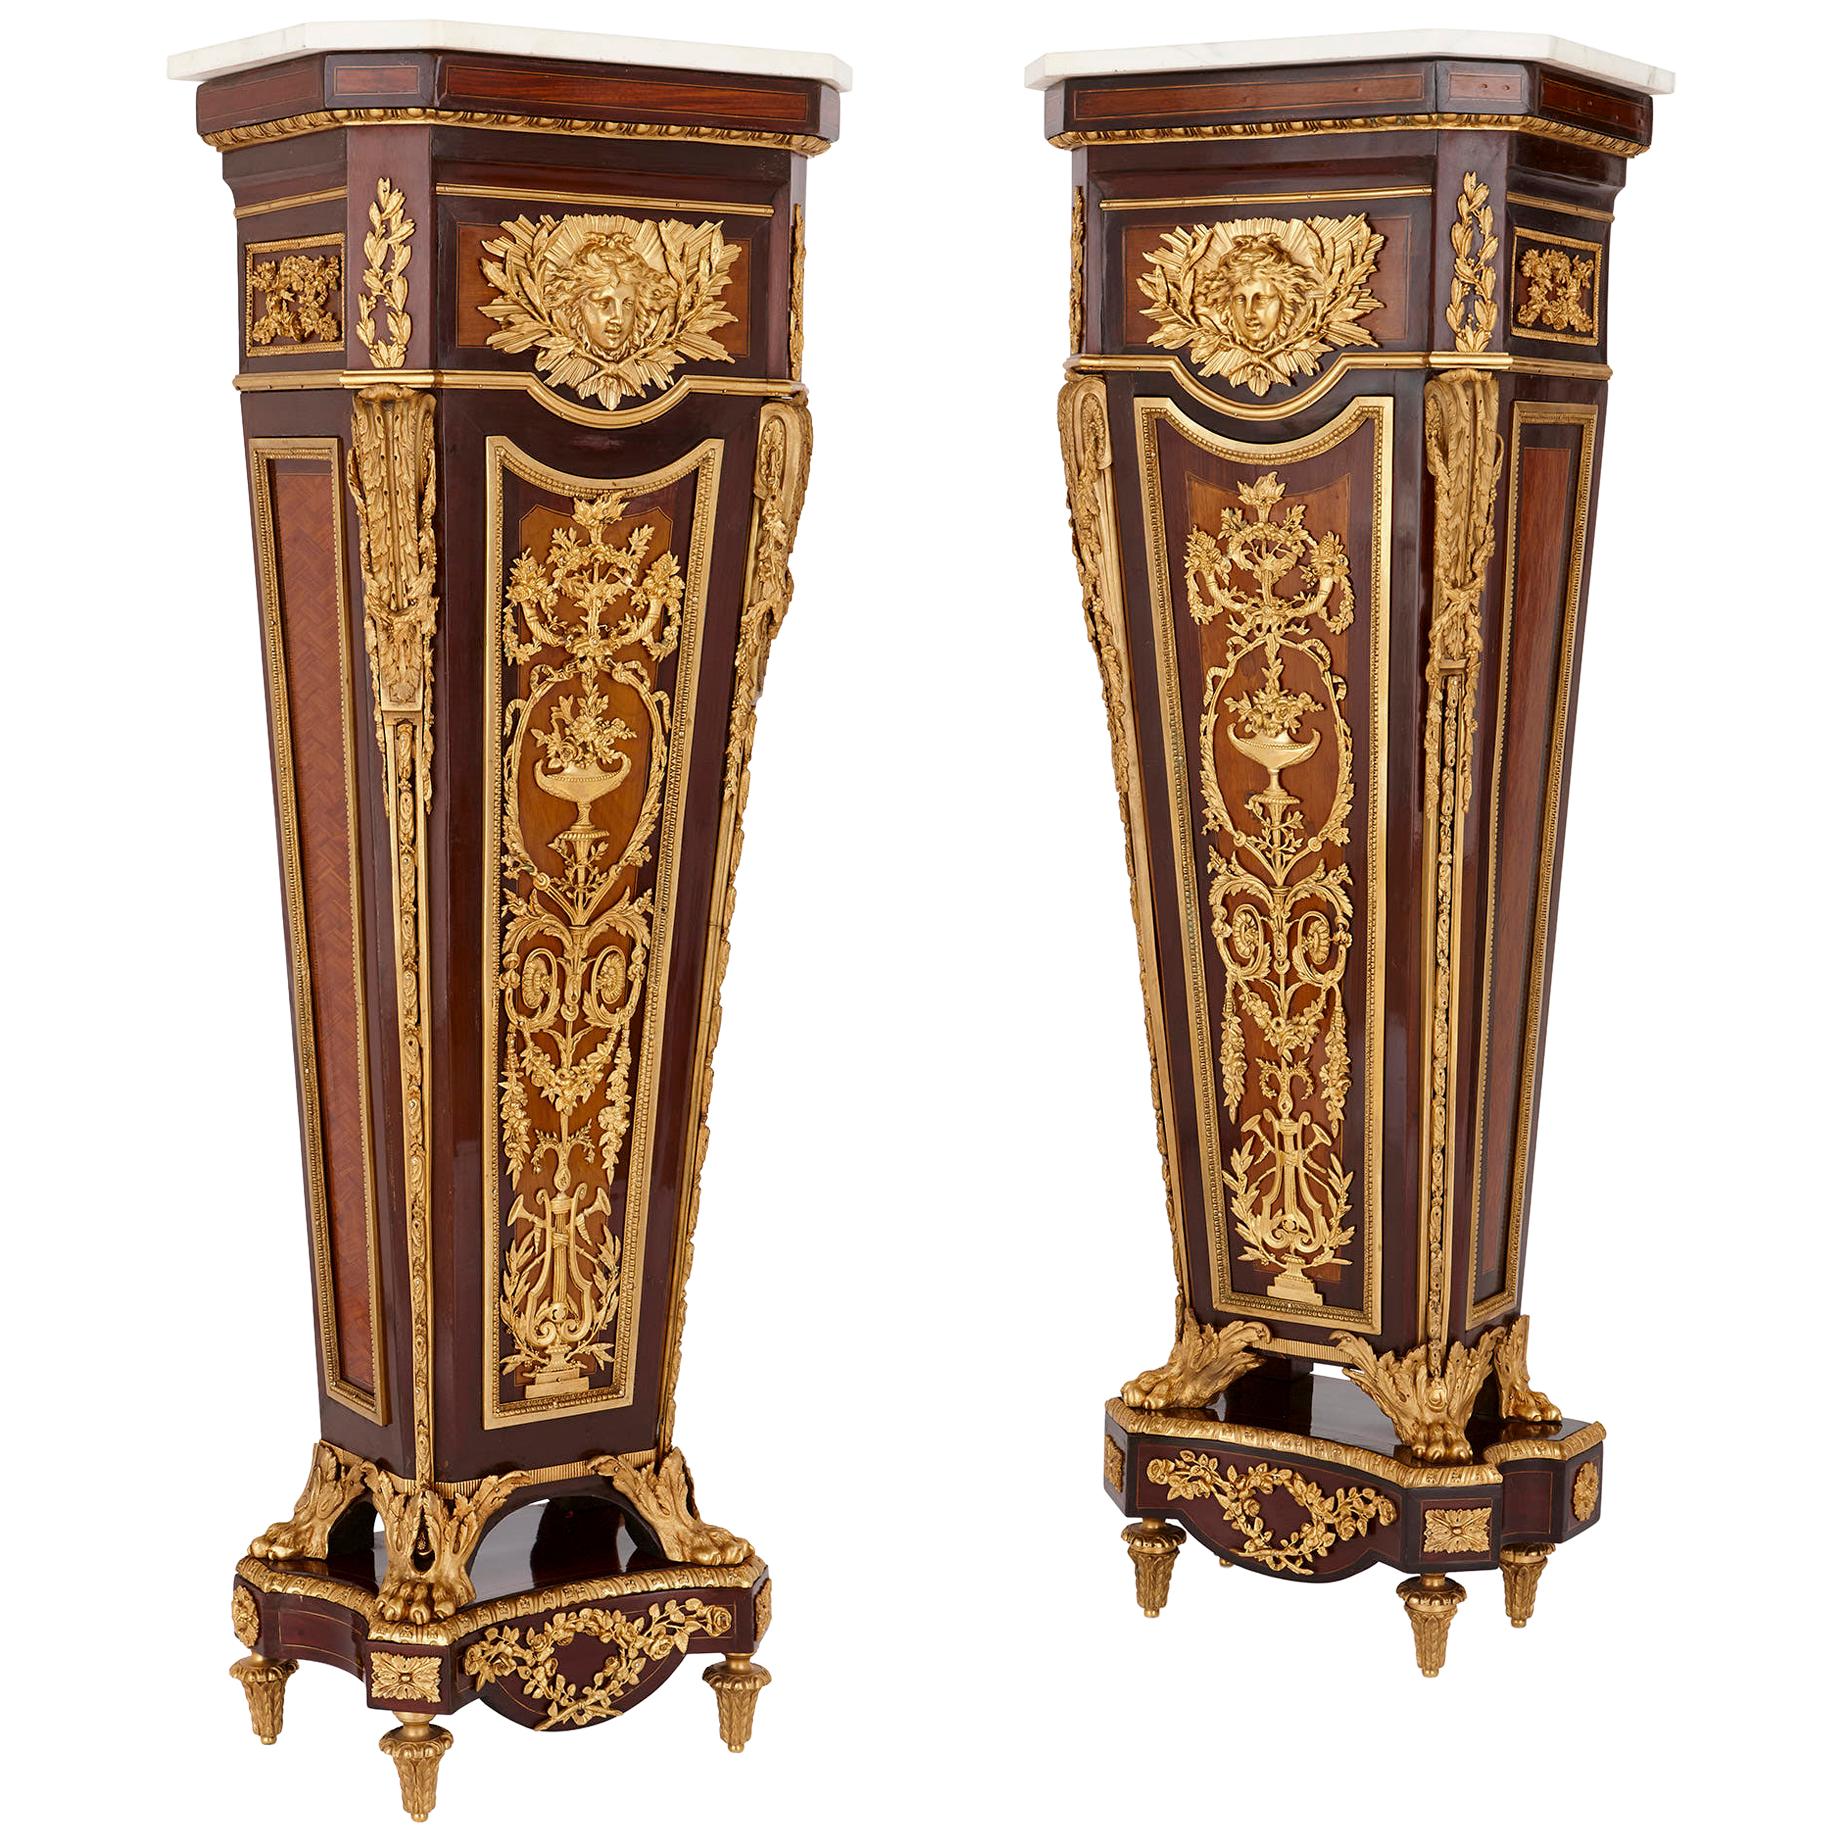 Near Pair of Gilt Bronze and Marble Mounted Mahogany Pedestals after Riesener